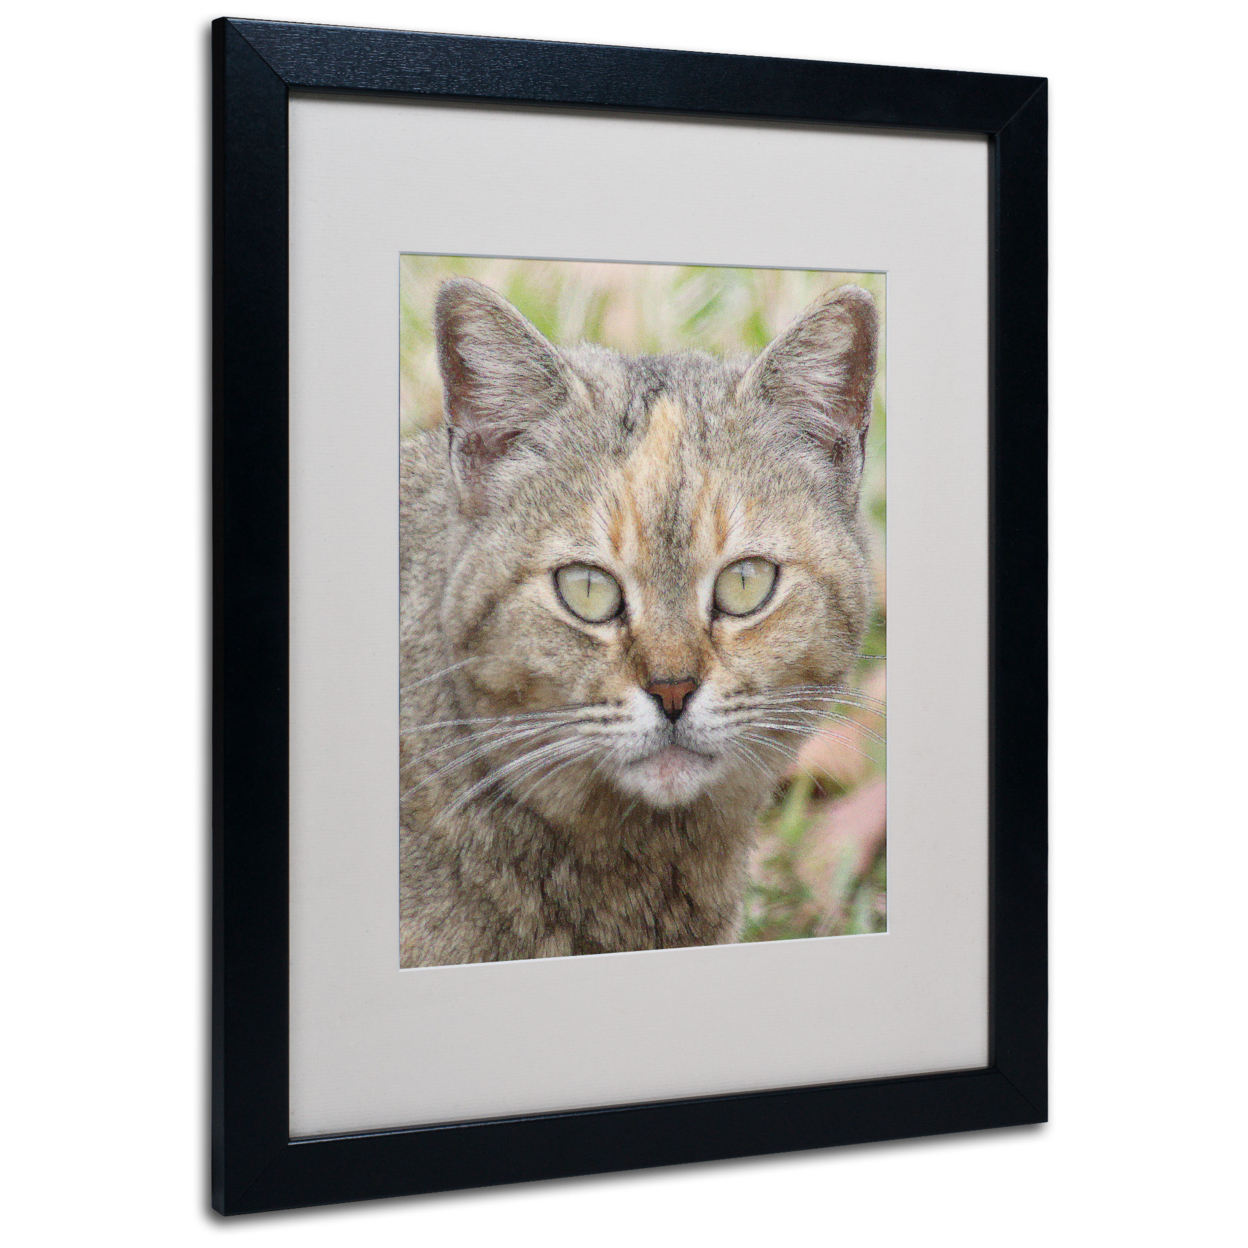 Patty Tuggle 'Pretty Kitty' Black Wooden Framed Art 18 X 22 Inches